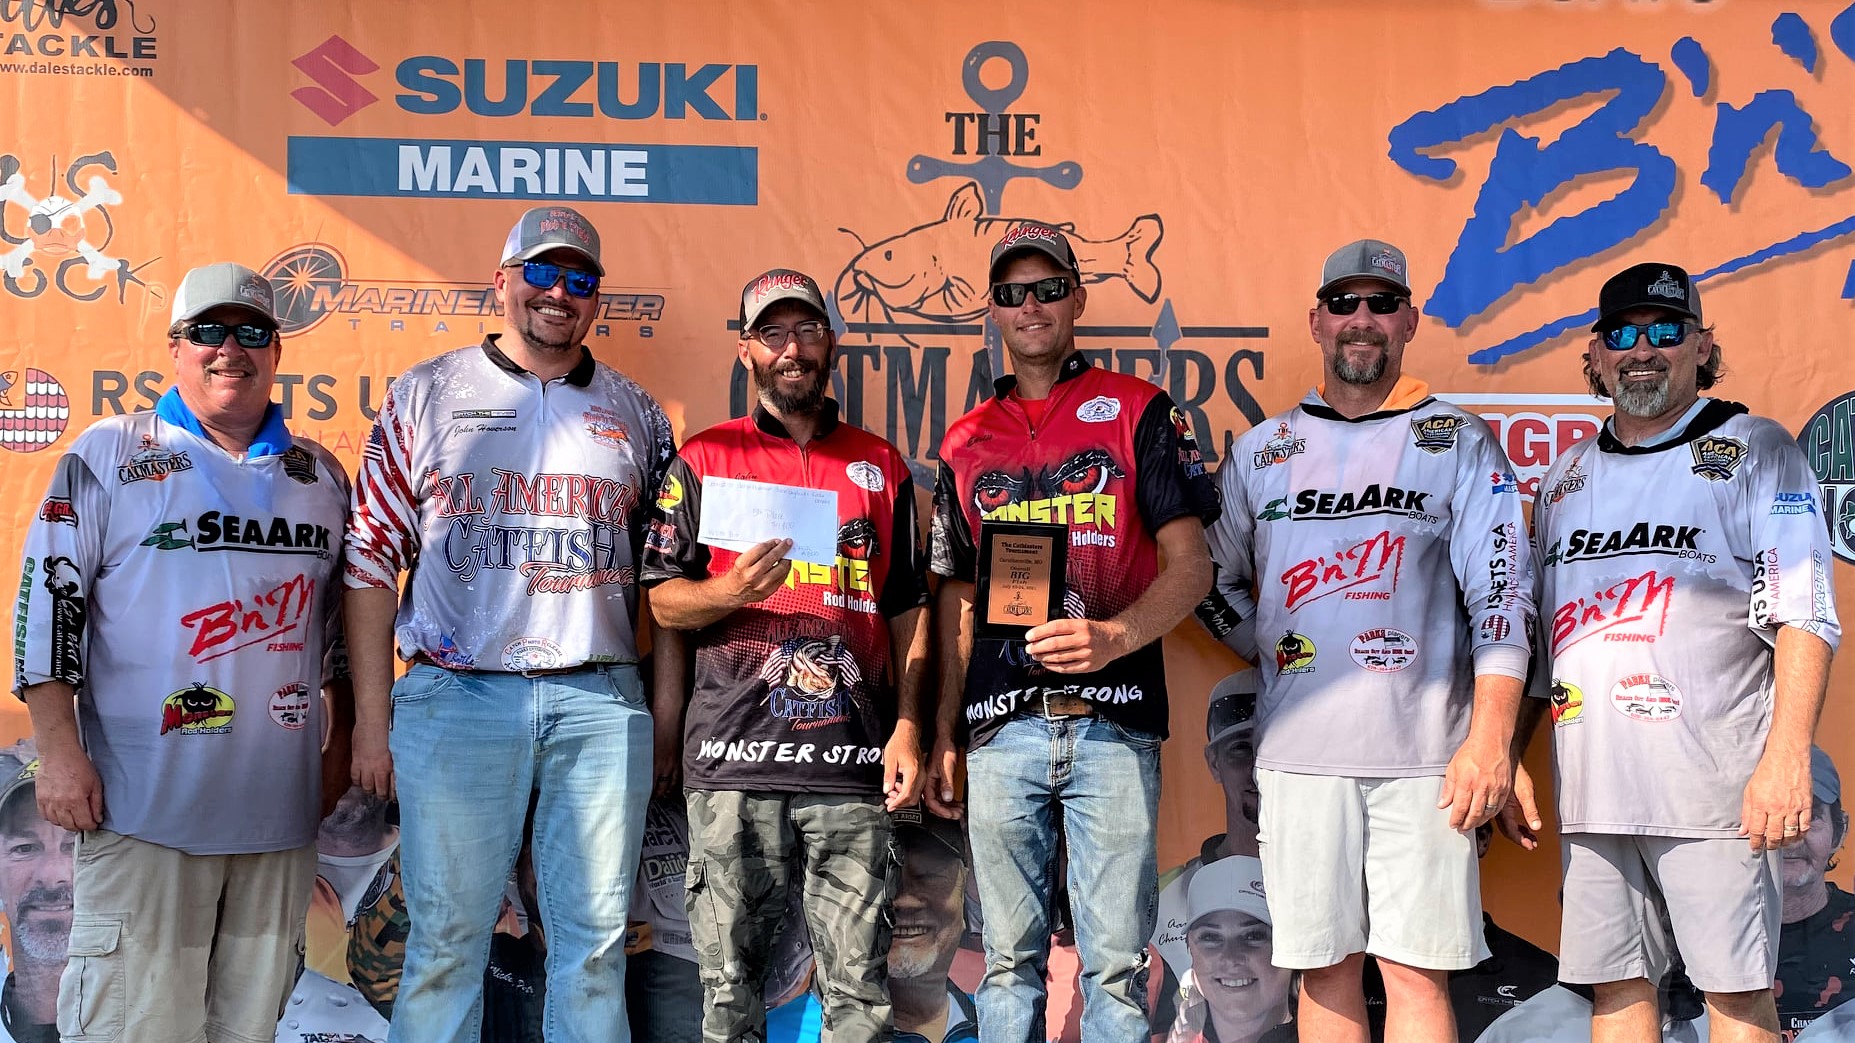 Tags: Intermediate, catfish, blue catfish, flathead, channel, tournament, The CatMasters, Caruthersville, MO, Mississippi River, Grizzly Jigs, BnM Poles, SeaArk Boats, Adam Long, Hunter Jones, Roy Harkness, Bill Dance, Bryan St Alma, Ty CatfishNOW